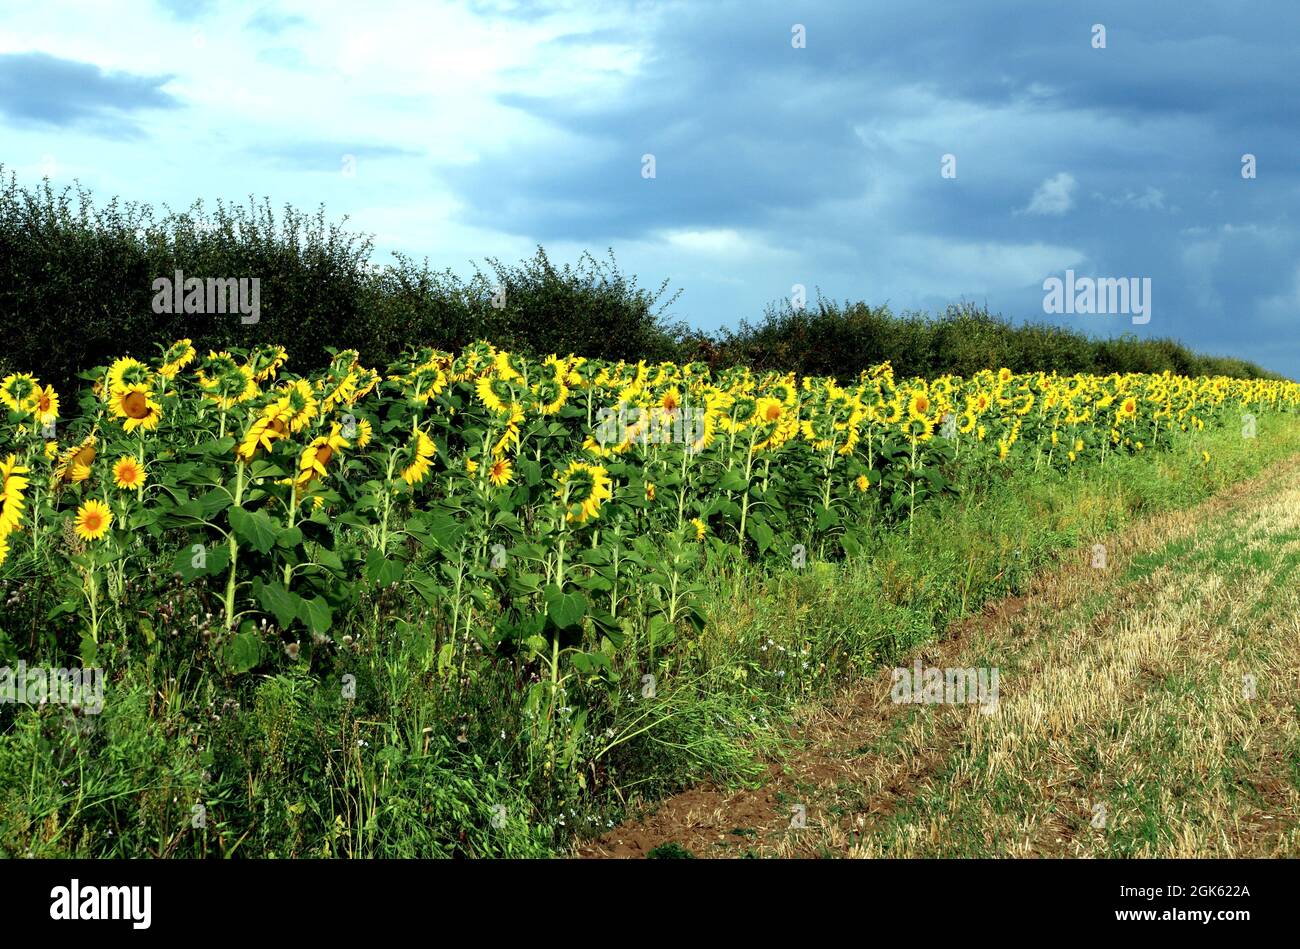 Sunflowers, Helianthus annuus, in drift, edge of agricultural field, Norfolk, England Stock Photo